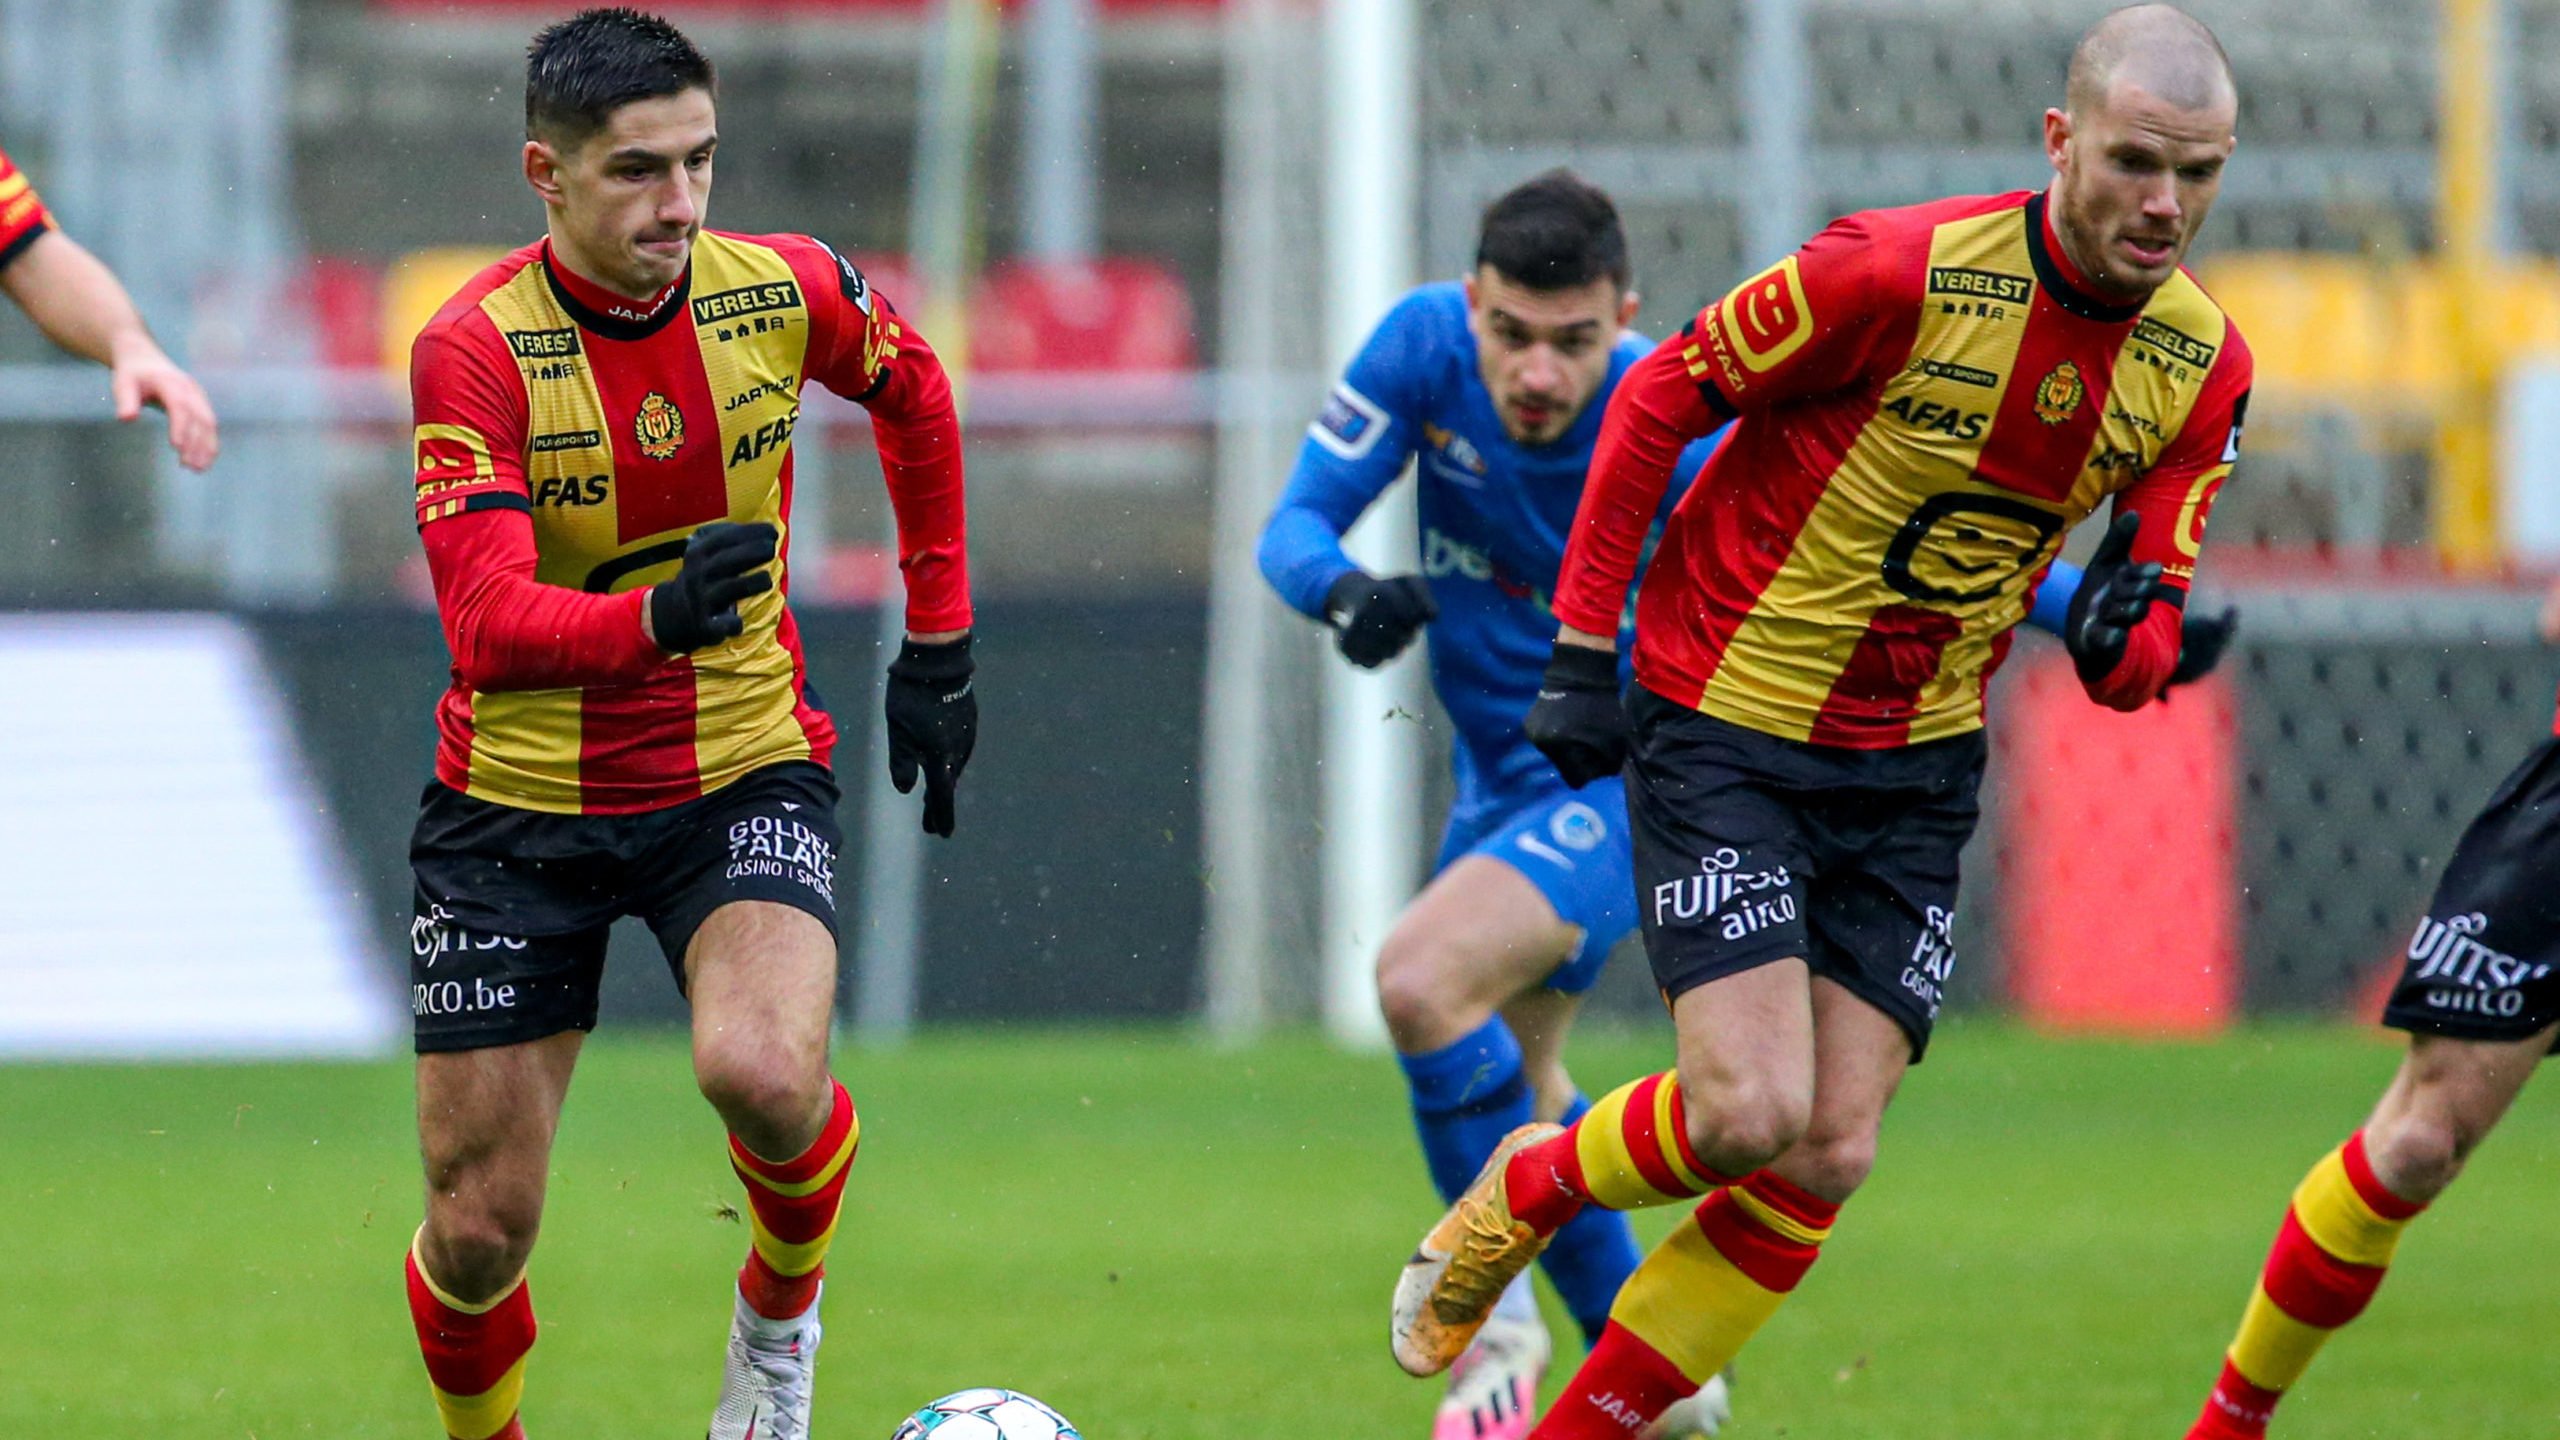 3 goals in 3 matches: Celtic winger Marian Shved shone again in Belgium today